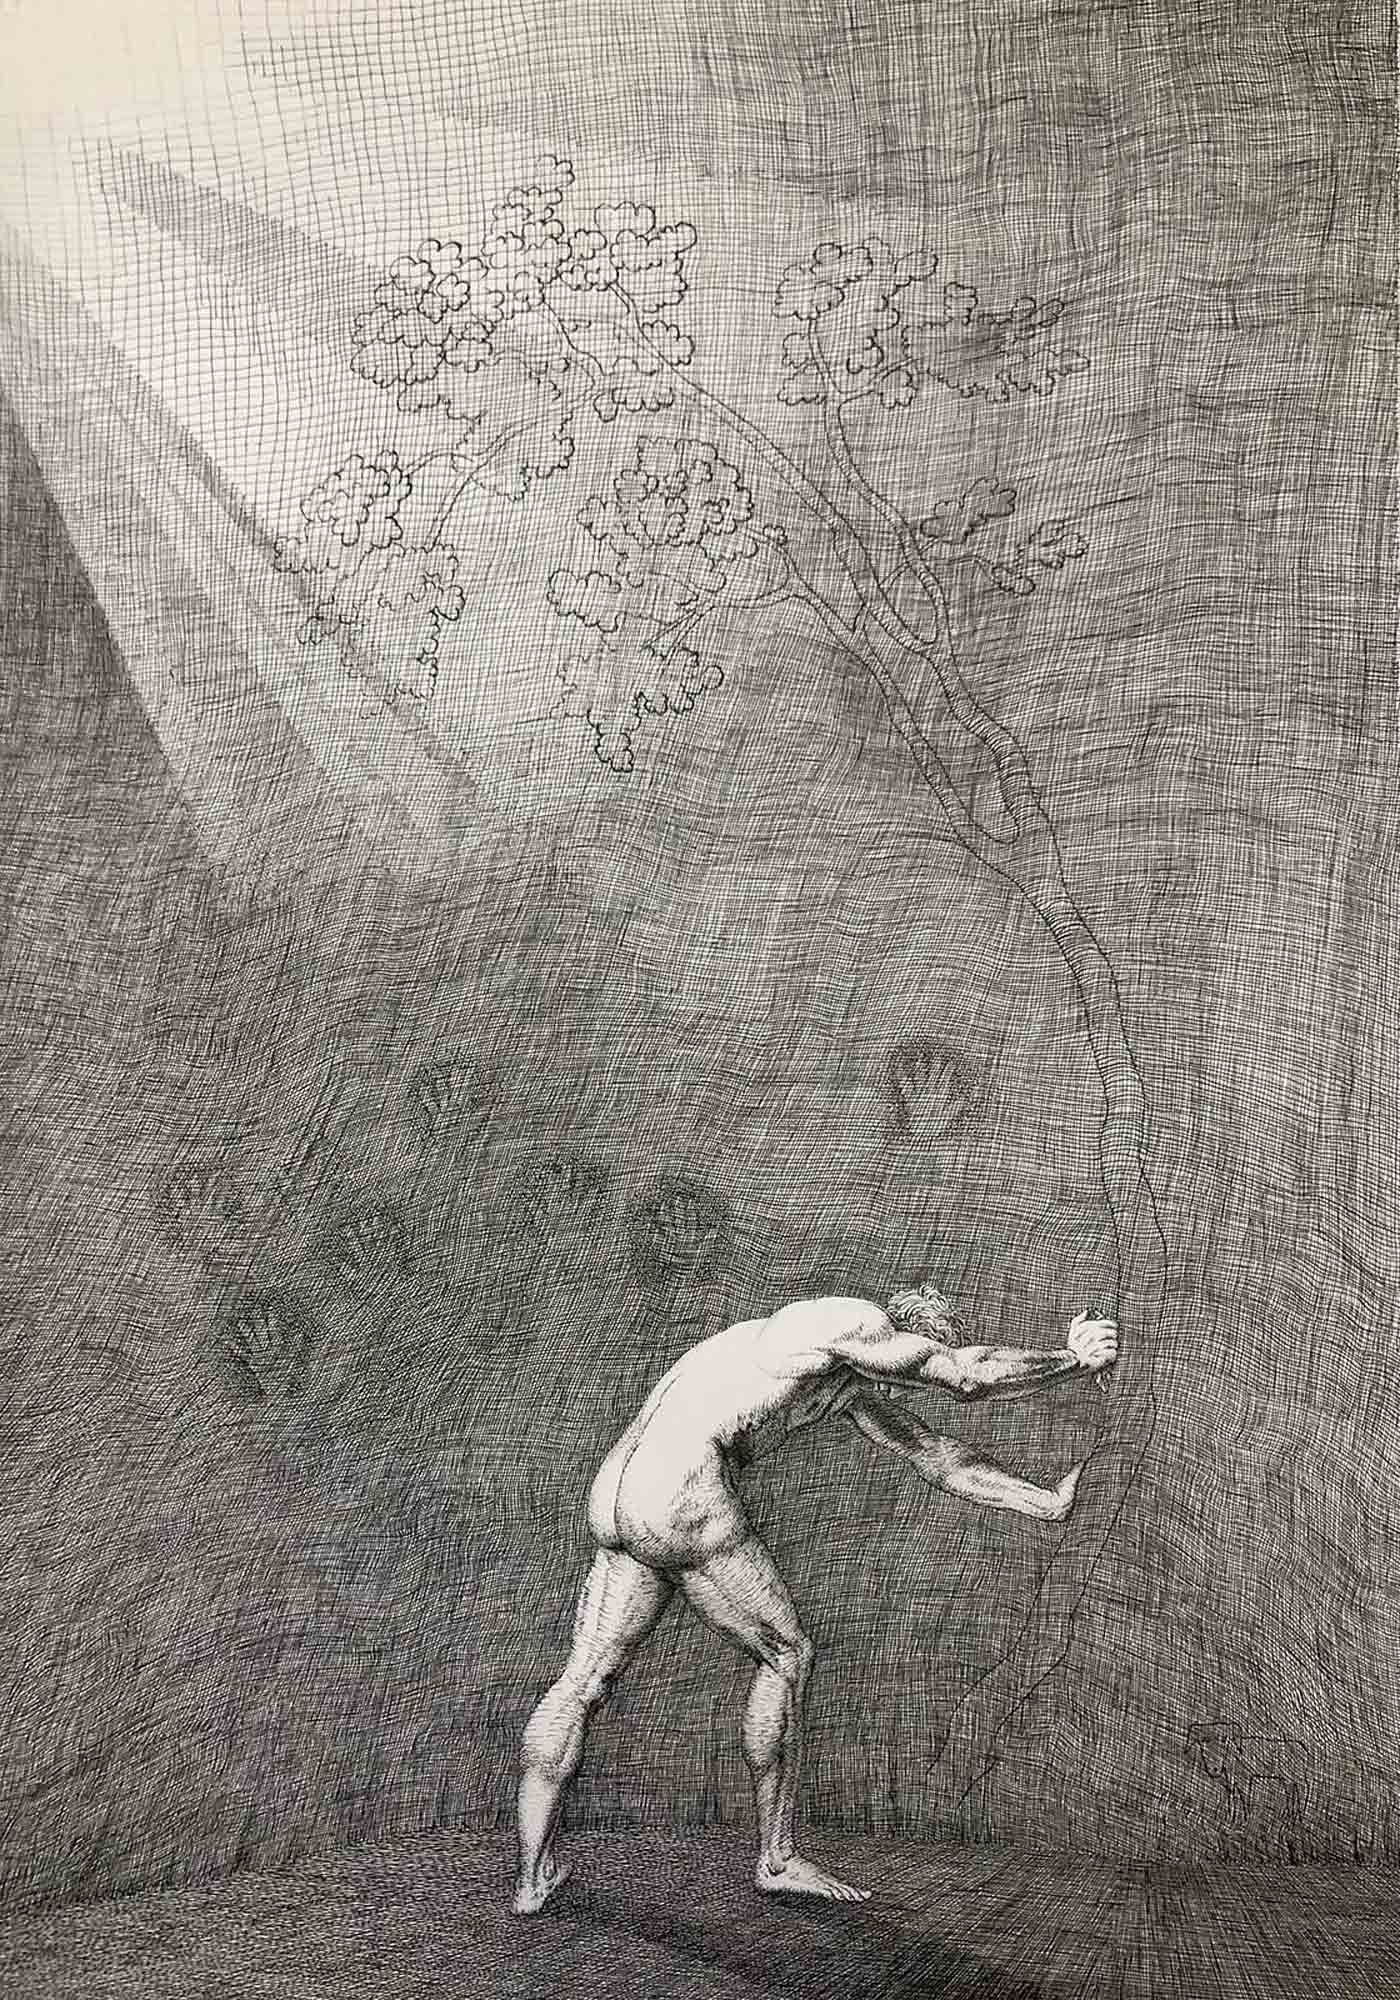 Mark Alexander's pen and ink drawing: Buff figure pushes against cave wall, sunlight beams to his left.